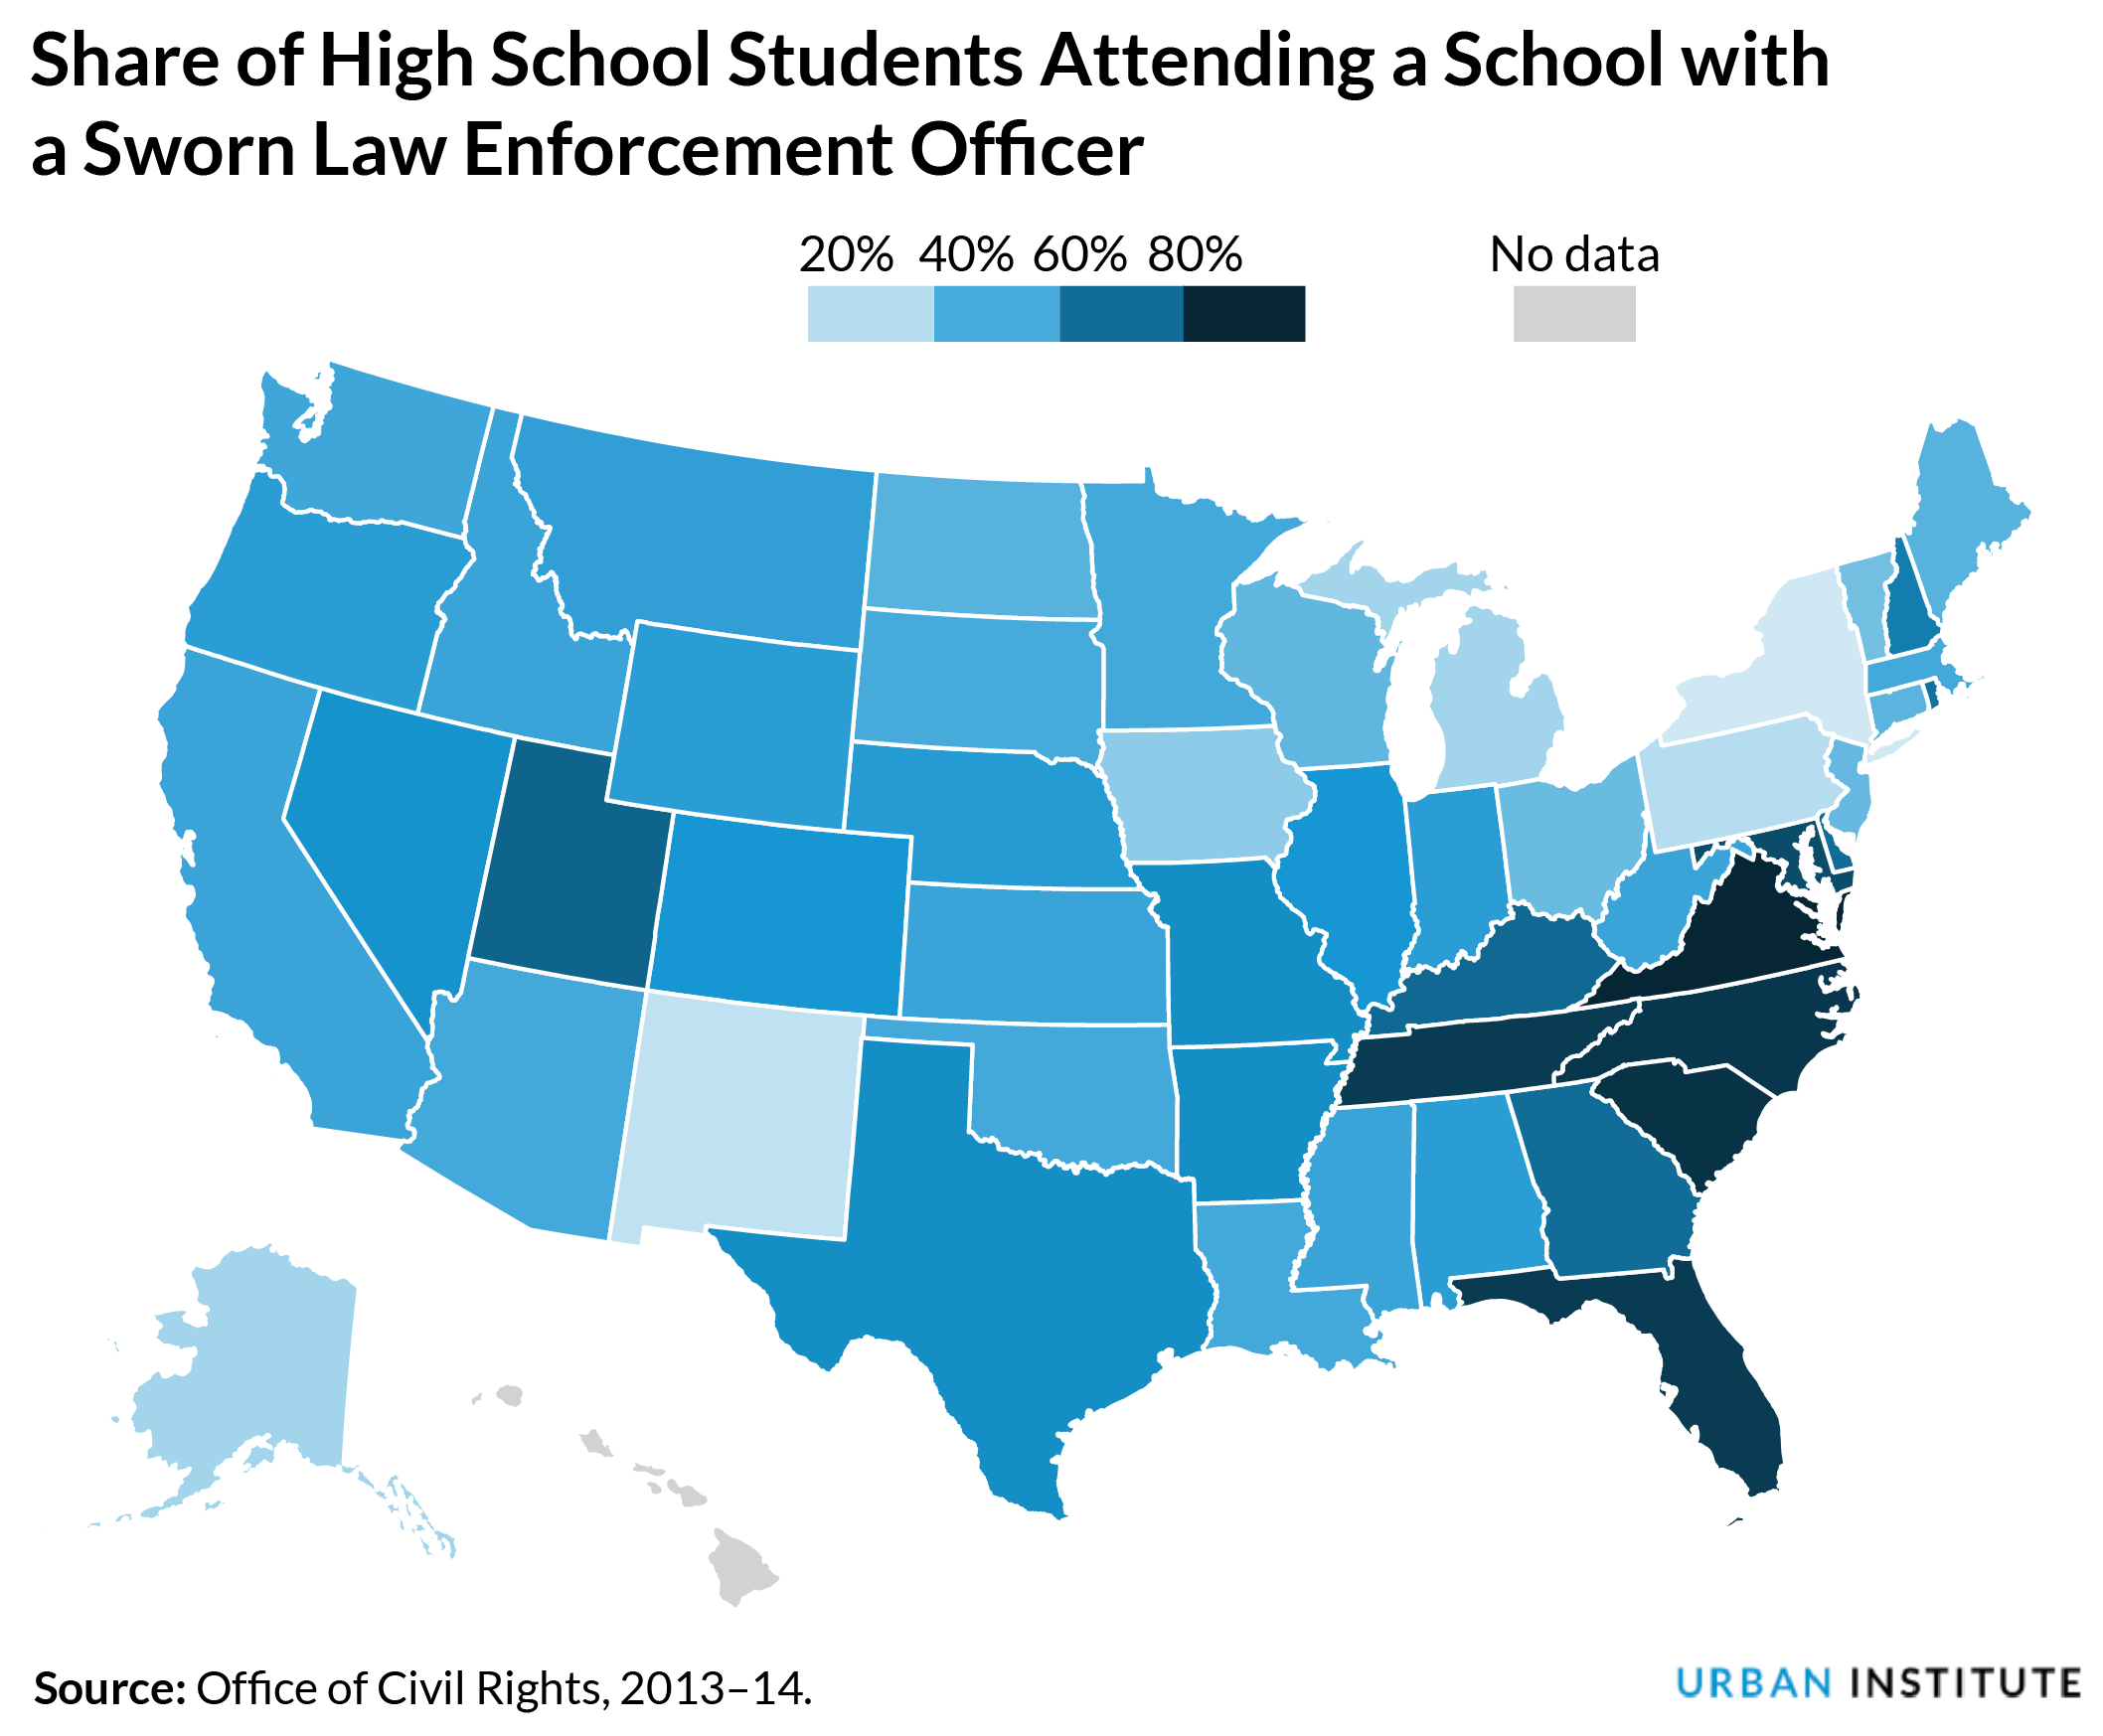 map showing share of high school students that attend a school with a sworn police officer